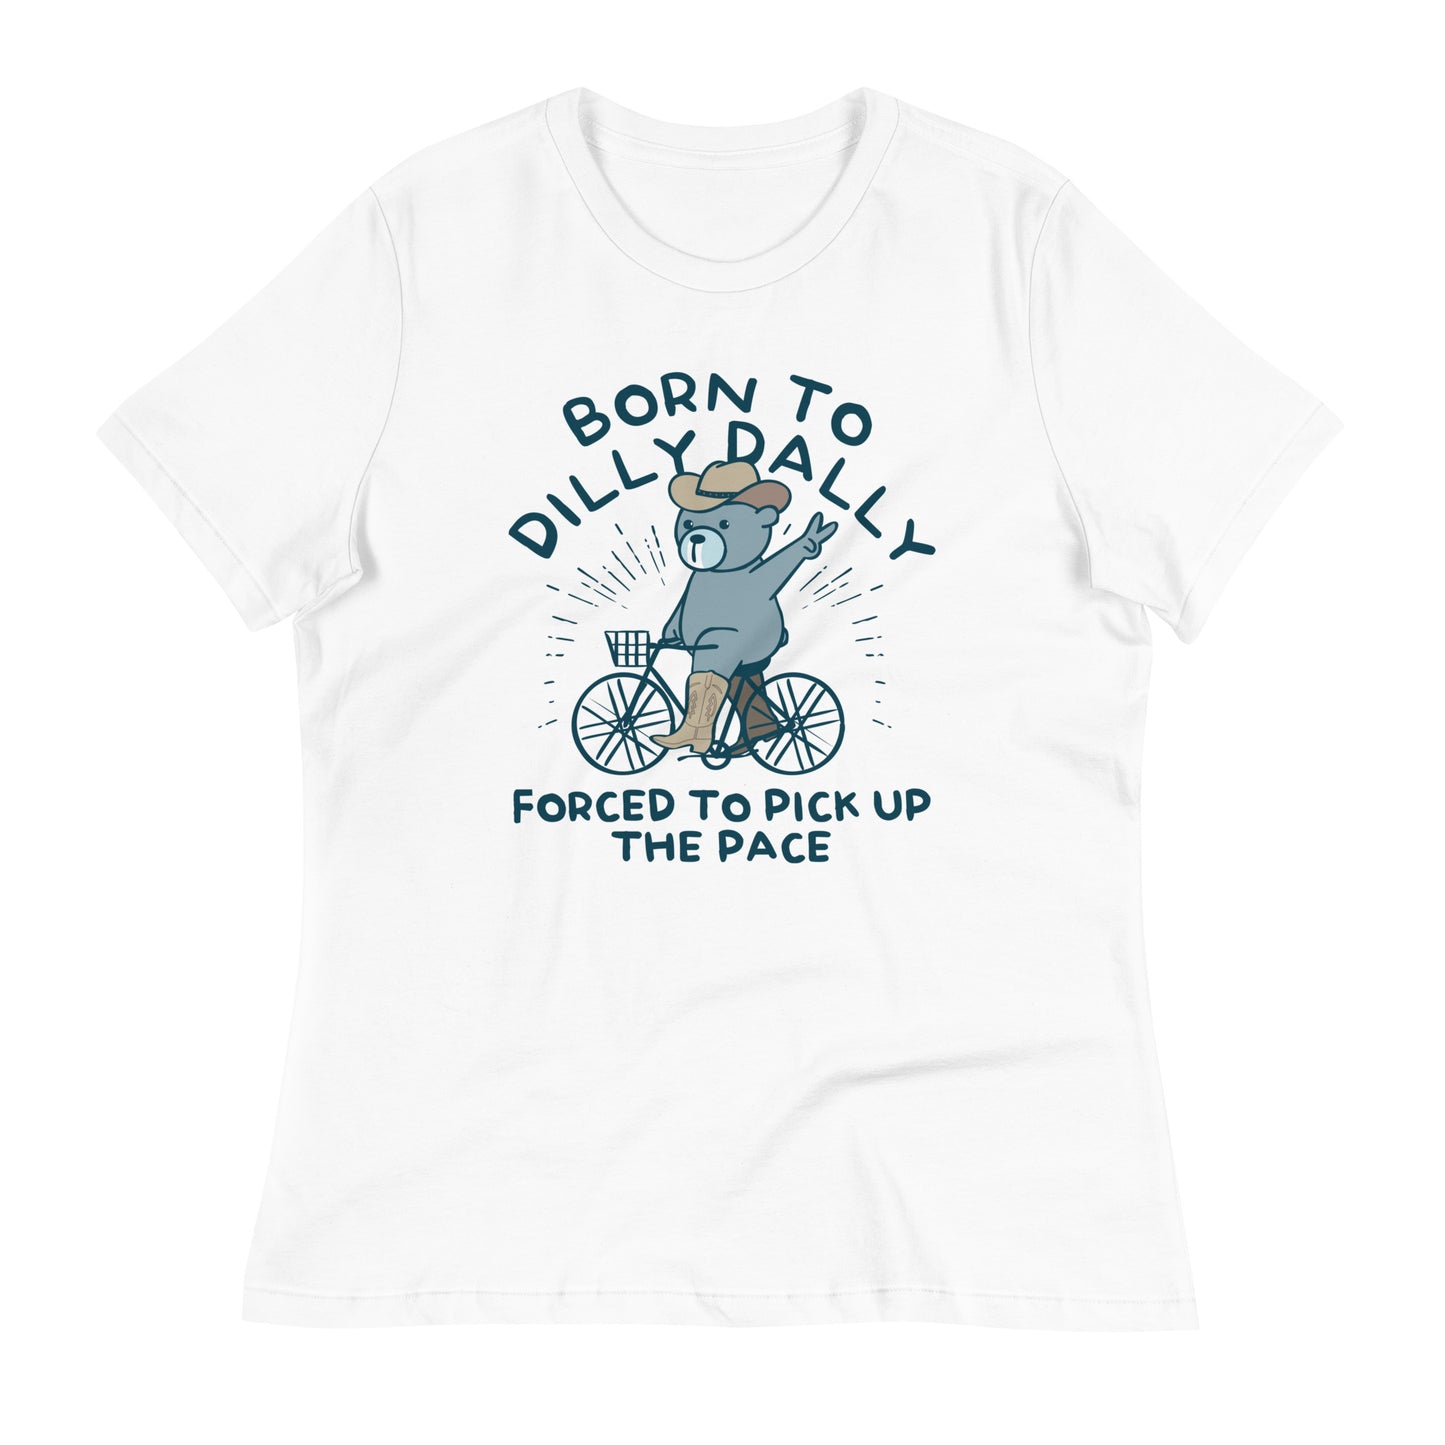 Born To Dilly Dally Forced To Pick Up The Pace Women's Signature Tee